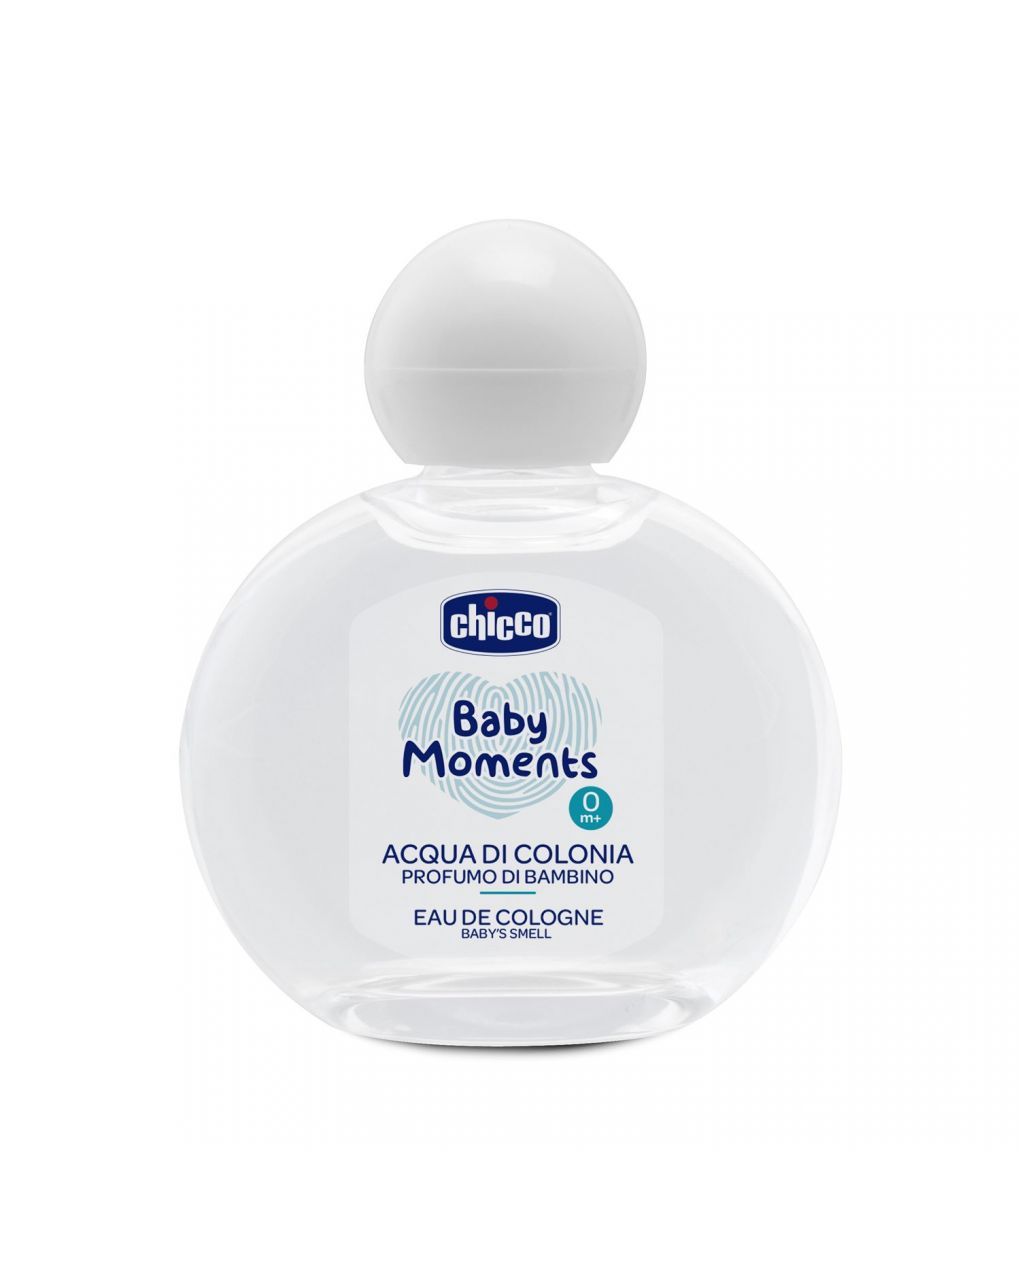 Agua de colonia baby moments chicco baby skin - Chicco